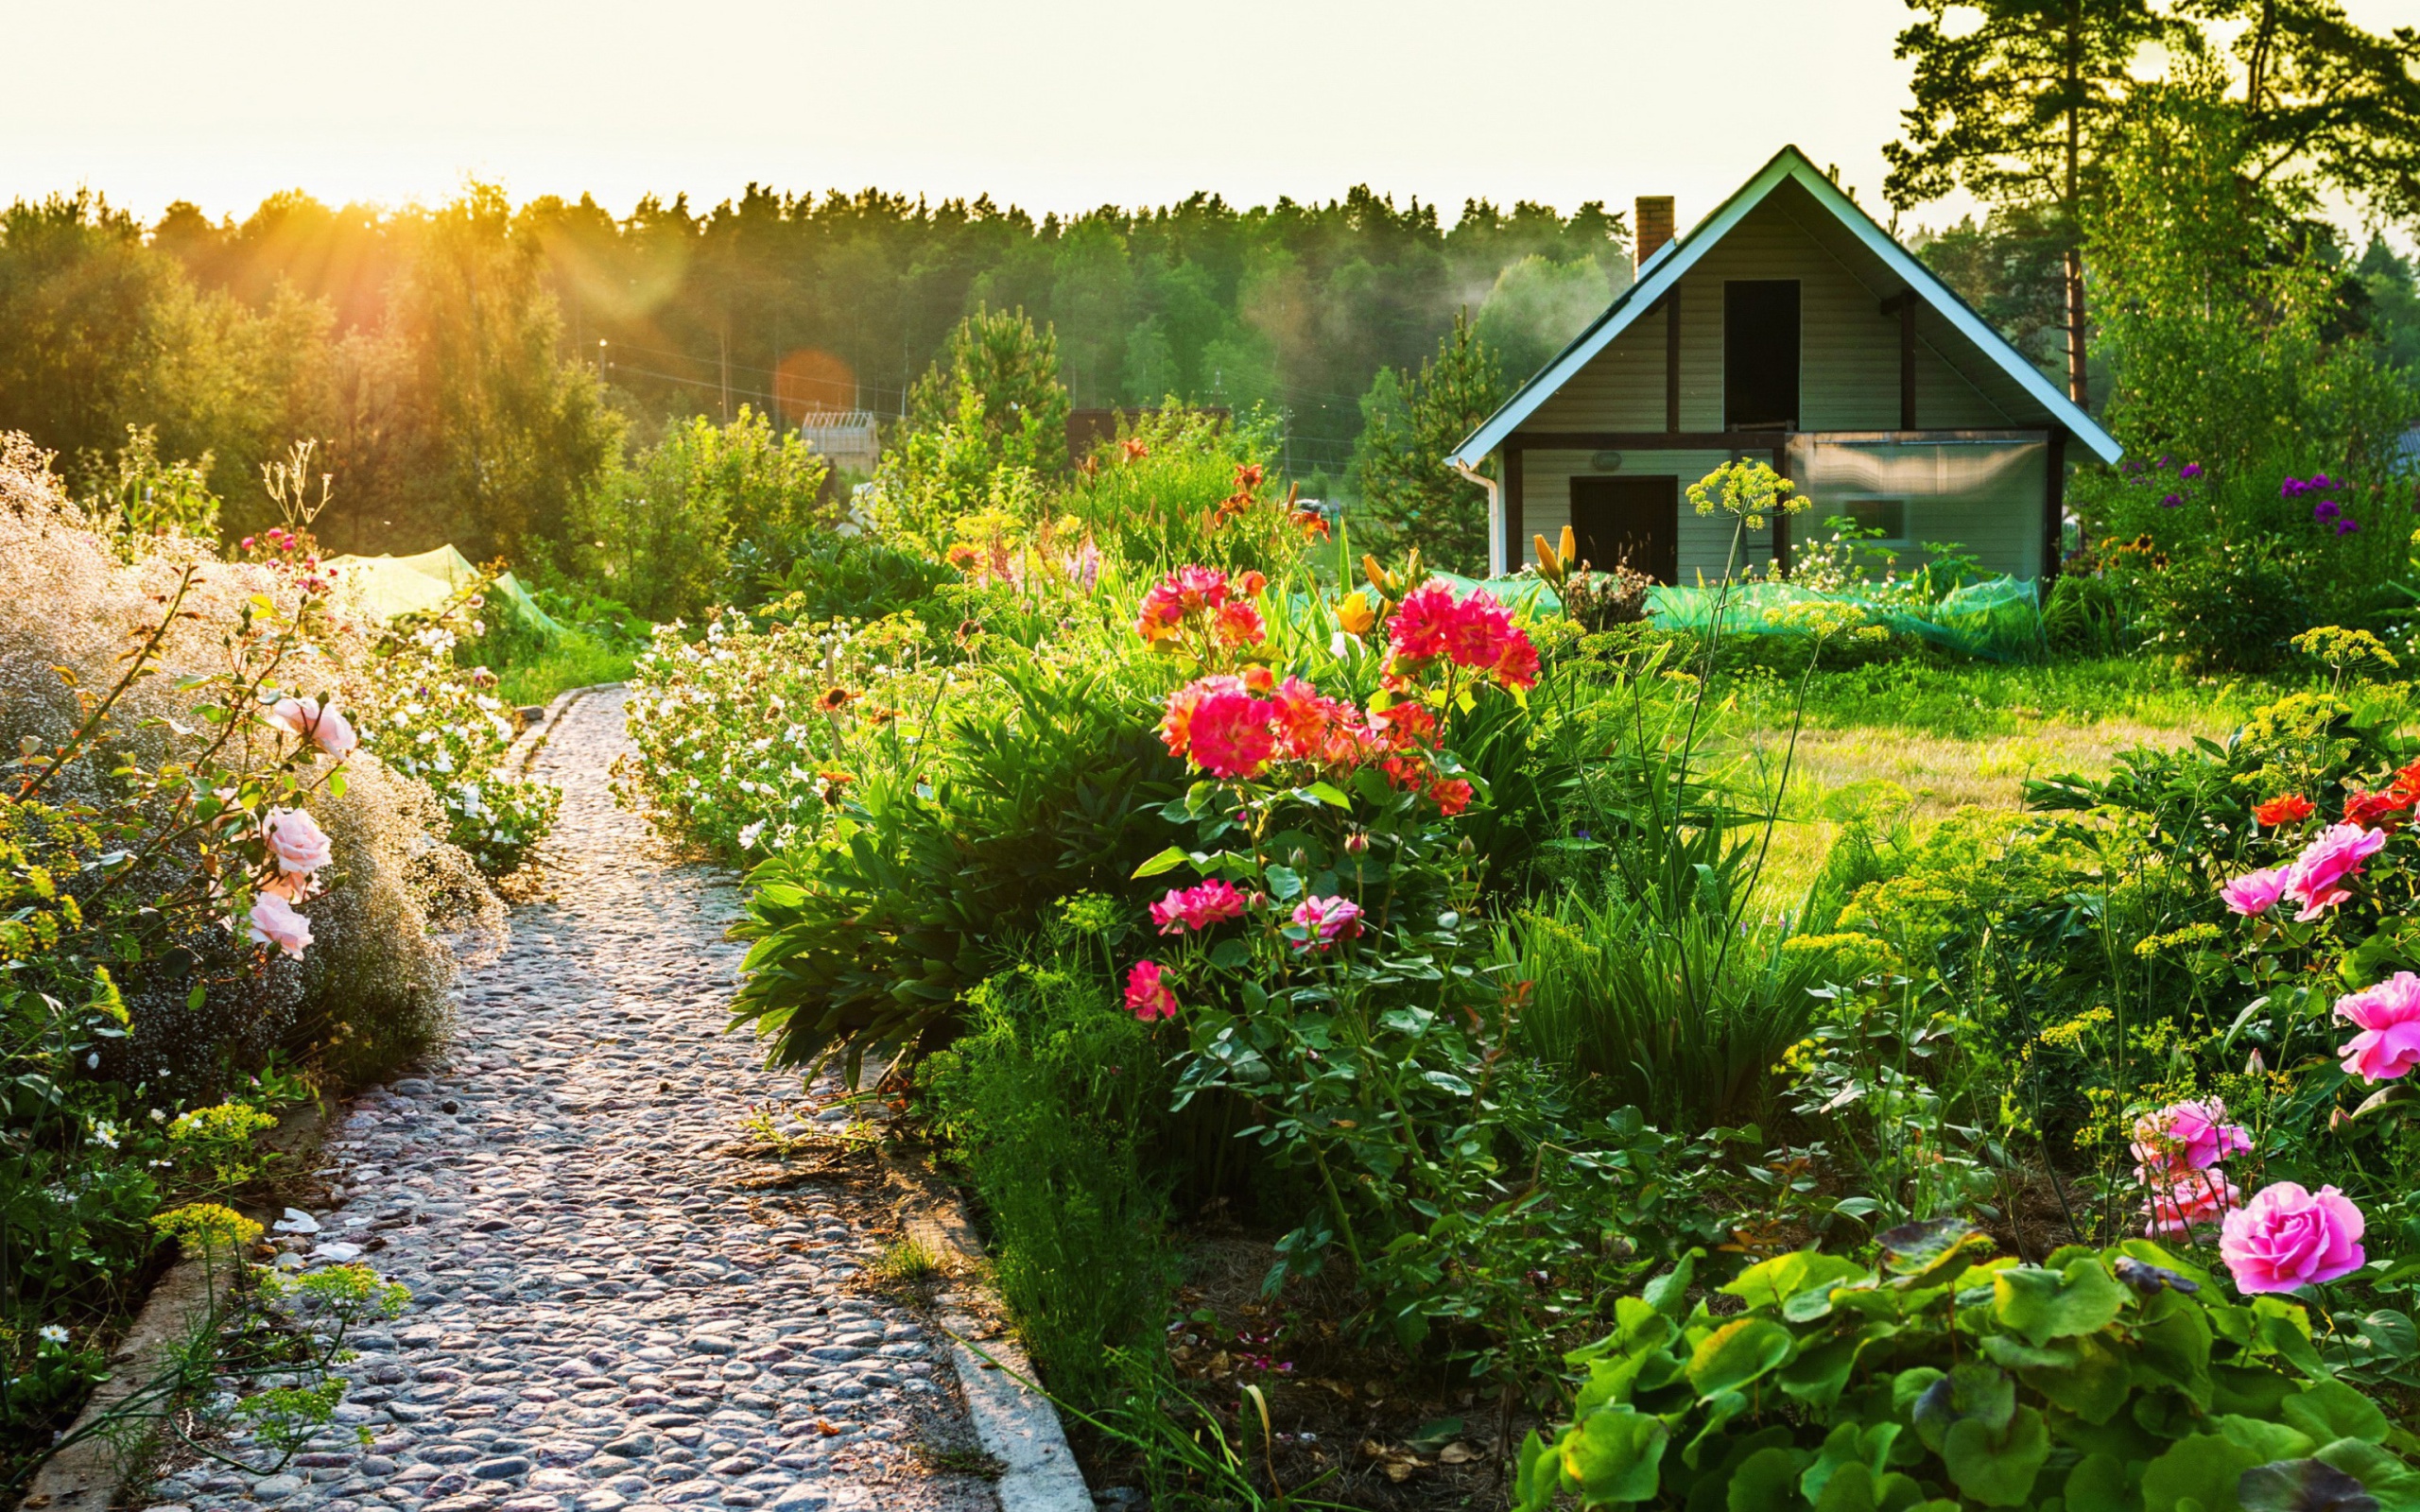 Country house with flowers wallpaper 2560x1600